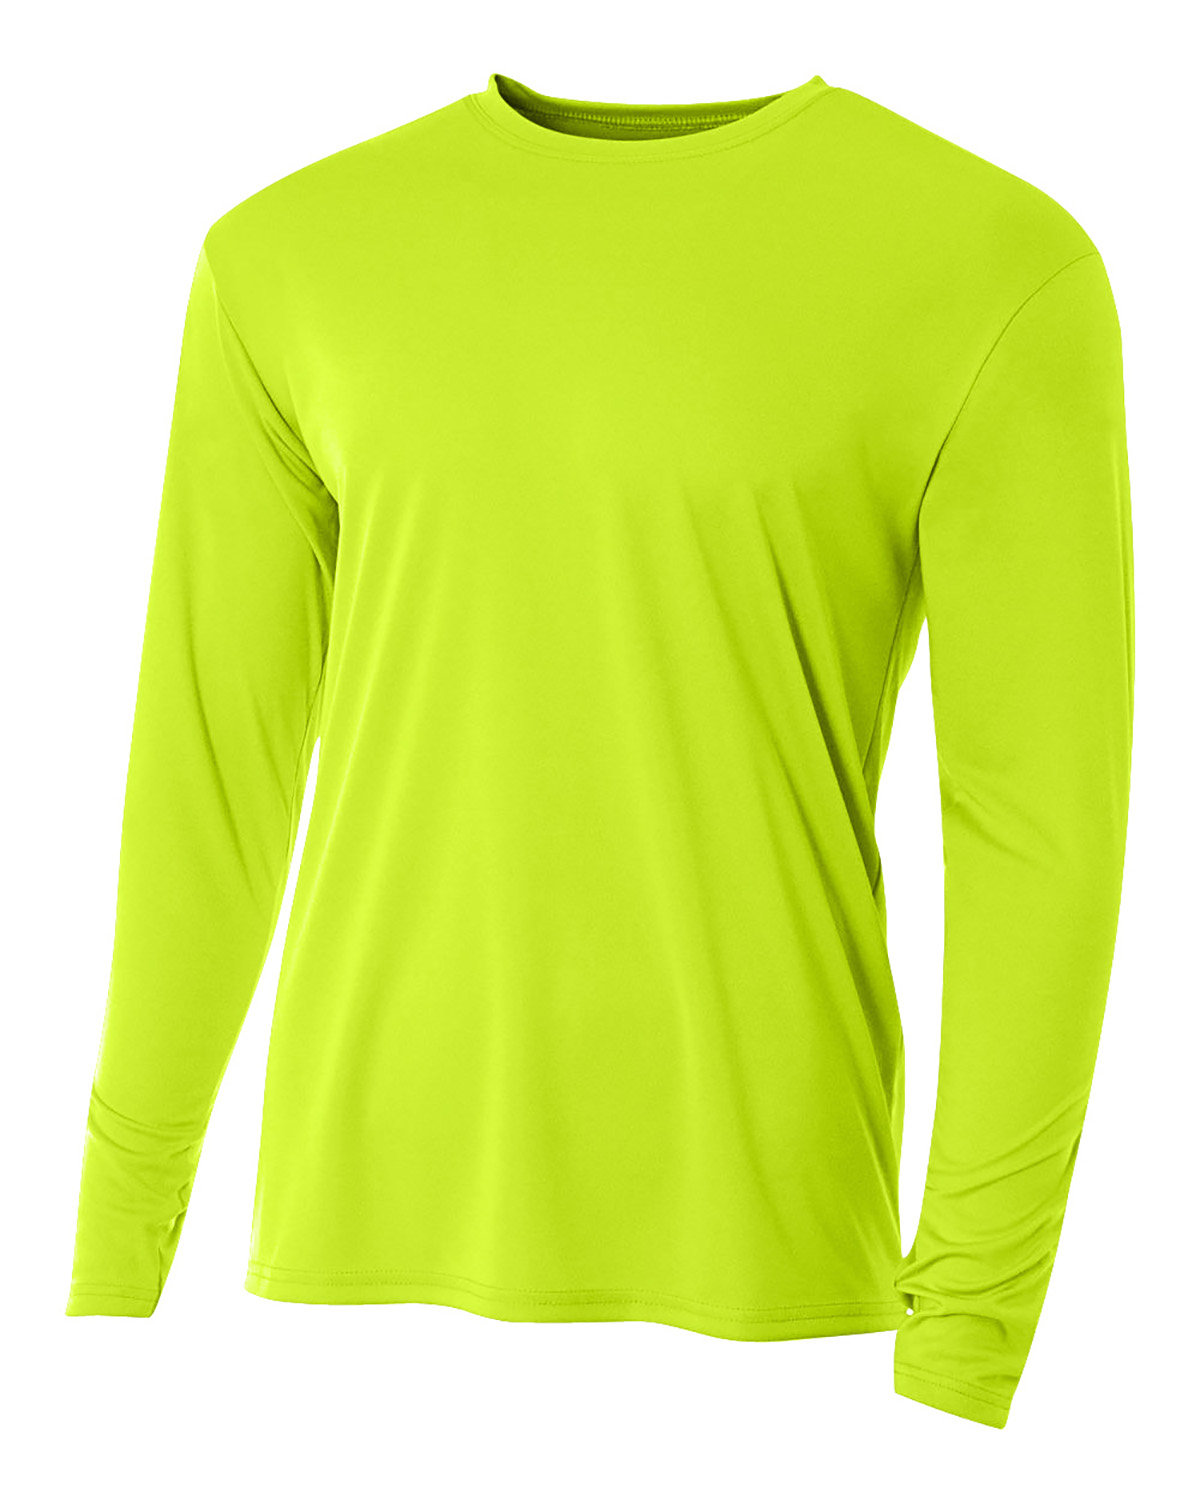 A4 Youth Long Sleeve Cooling Performance Crew Shirt LIME 